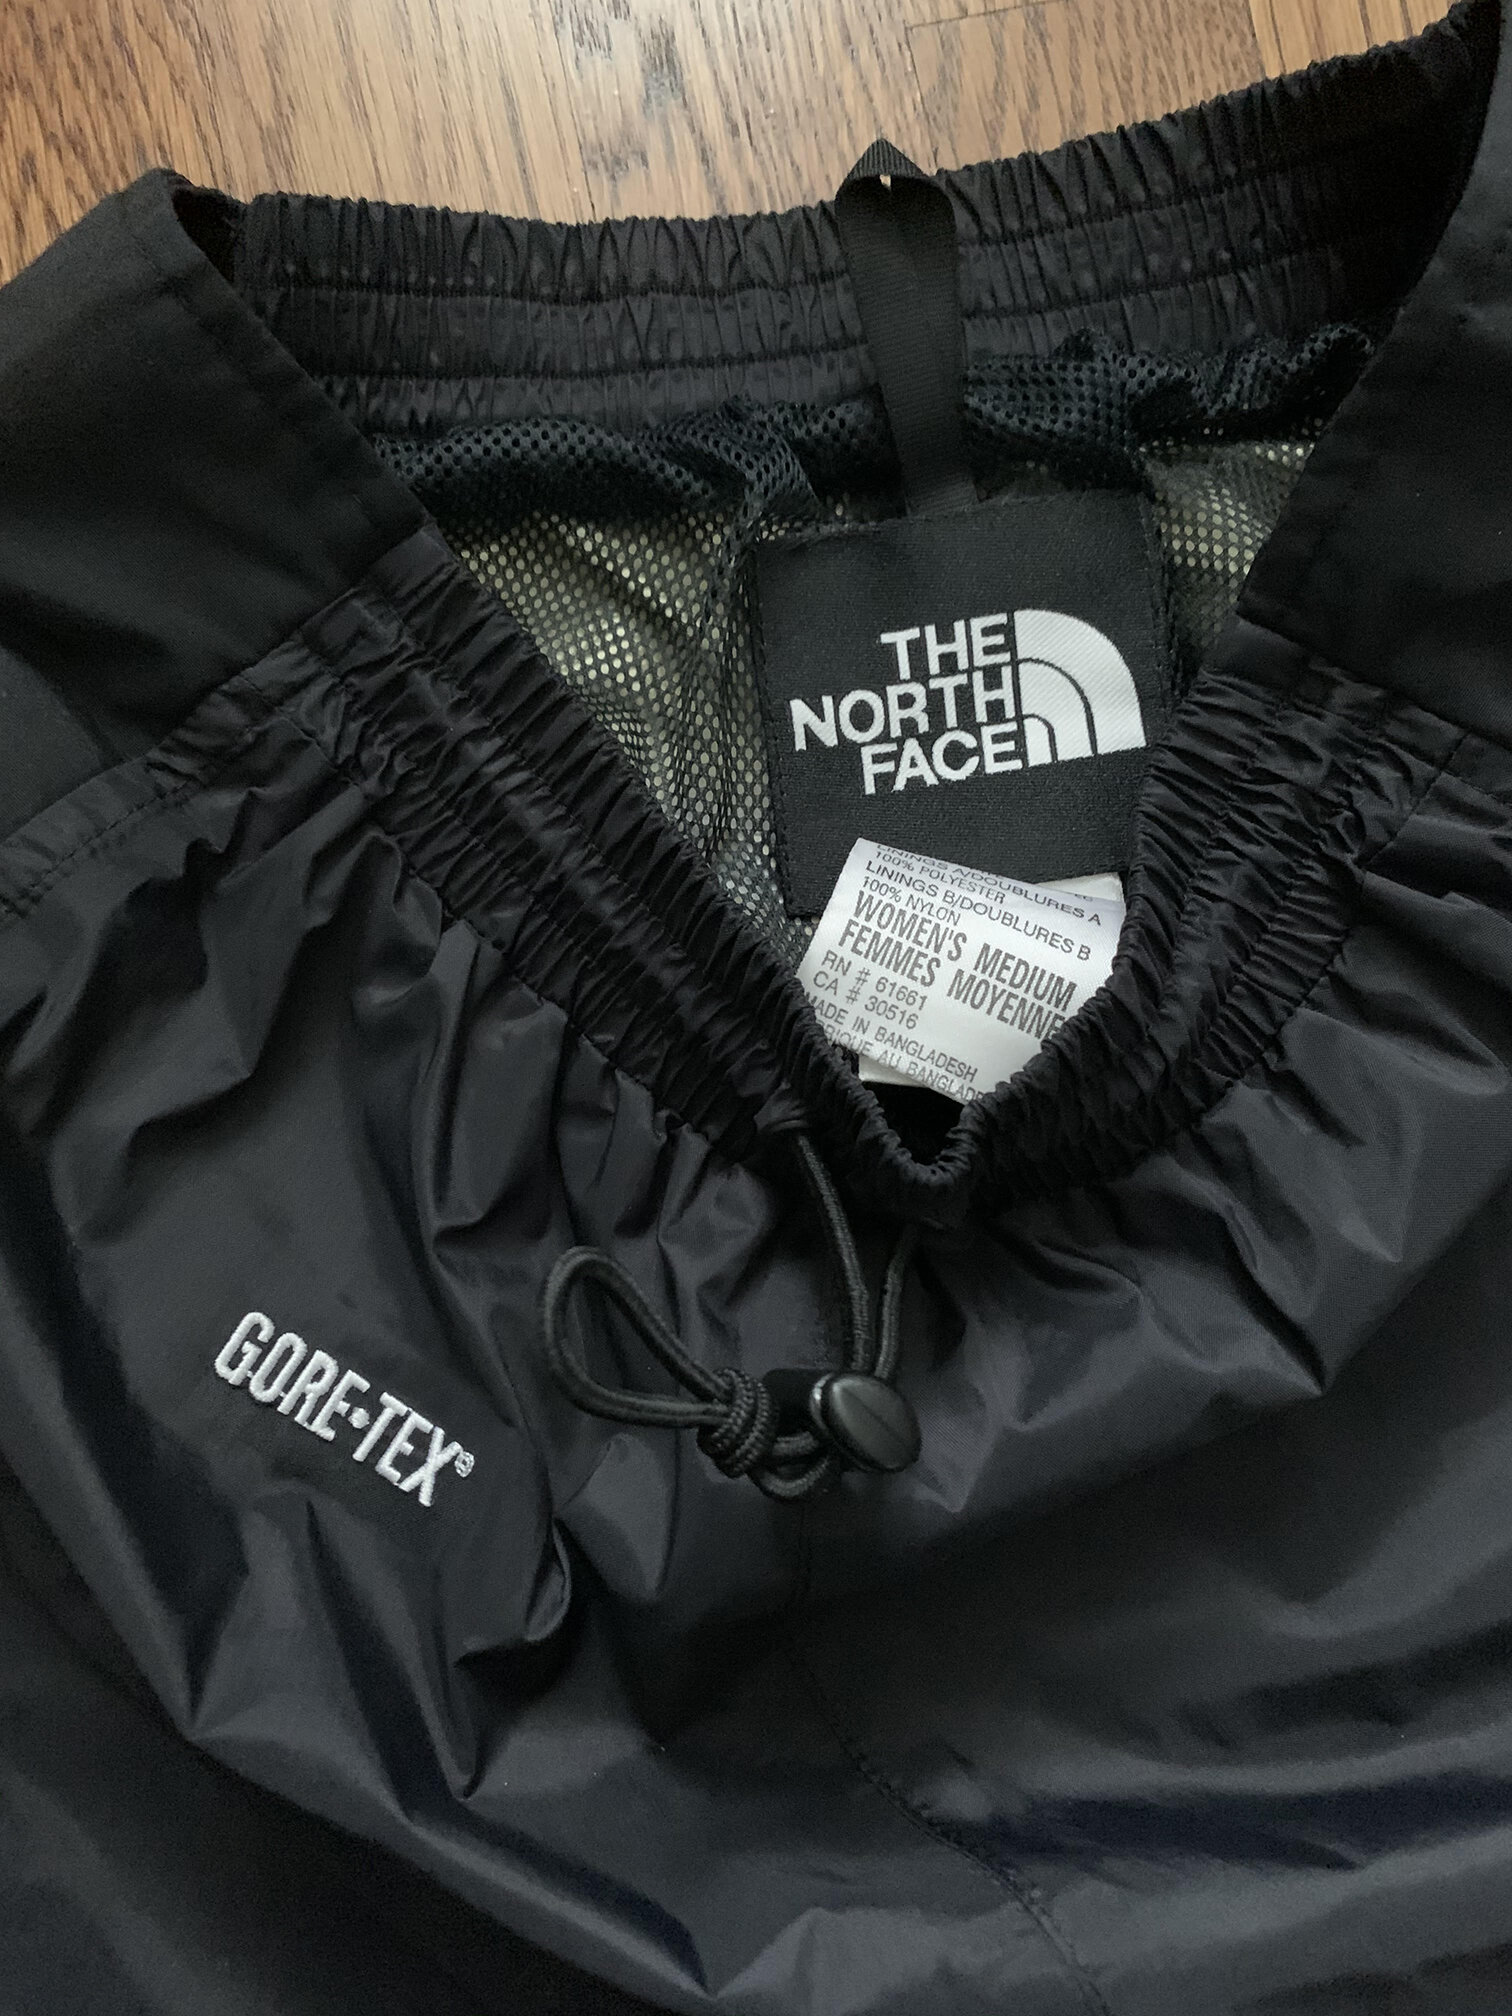 The North Face Mountain Pants  Mens  REI Coop